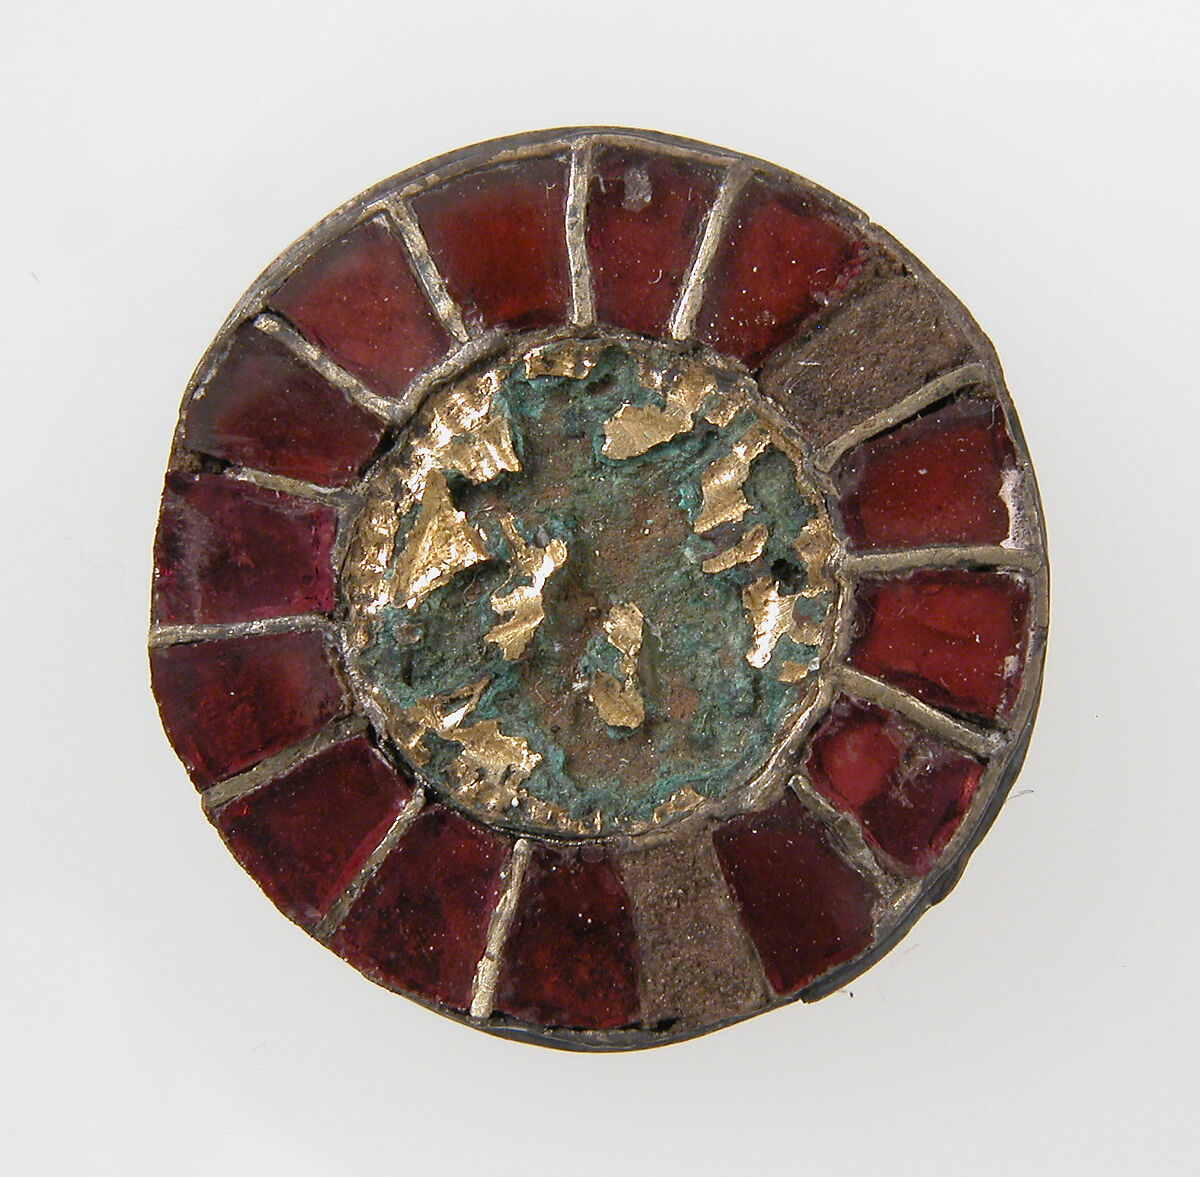 Disk Brooch, Silver on iron core, partial gilt, glass paste or garnet, Frankish 